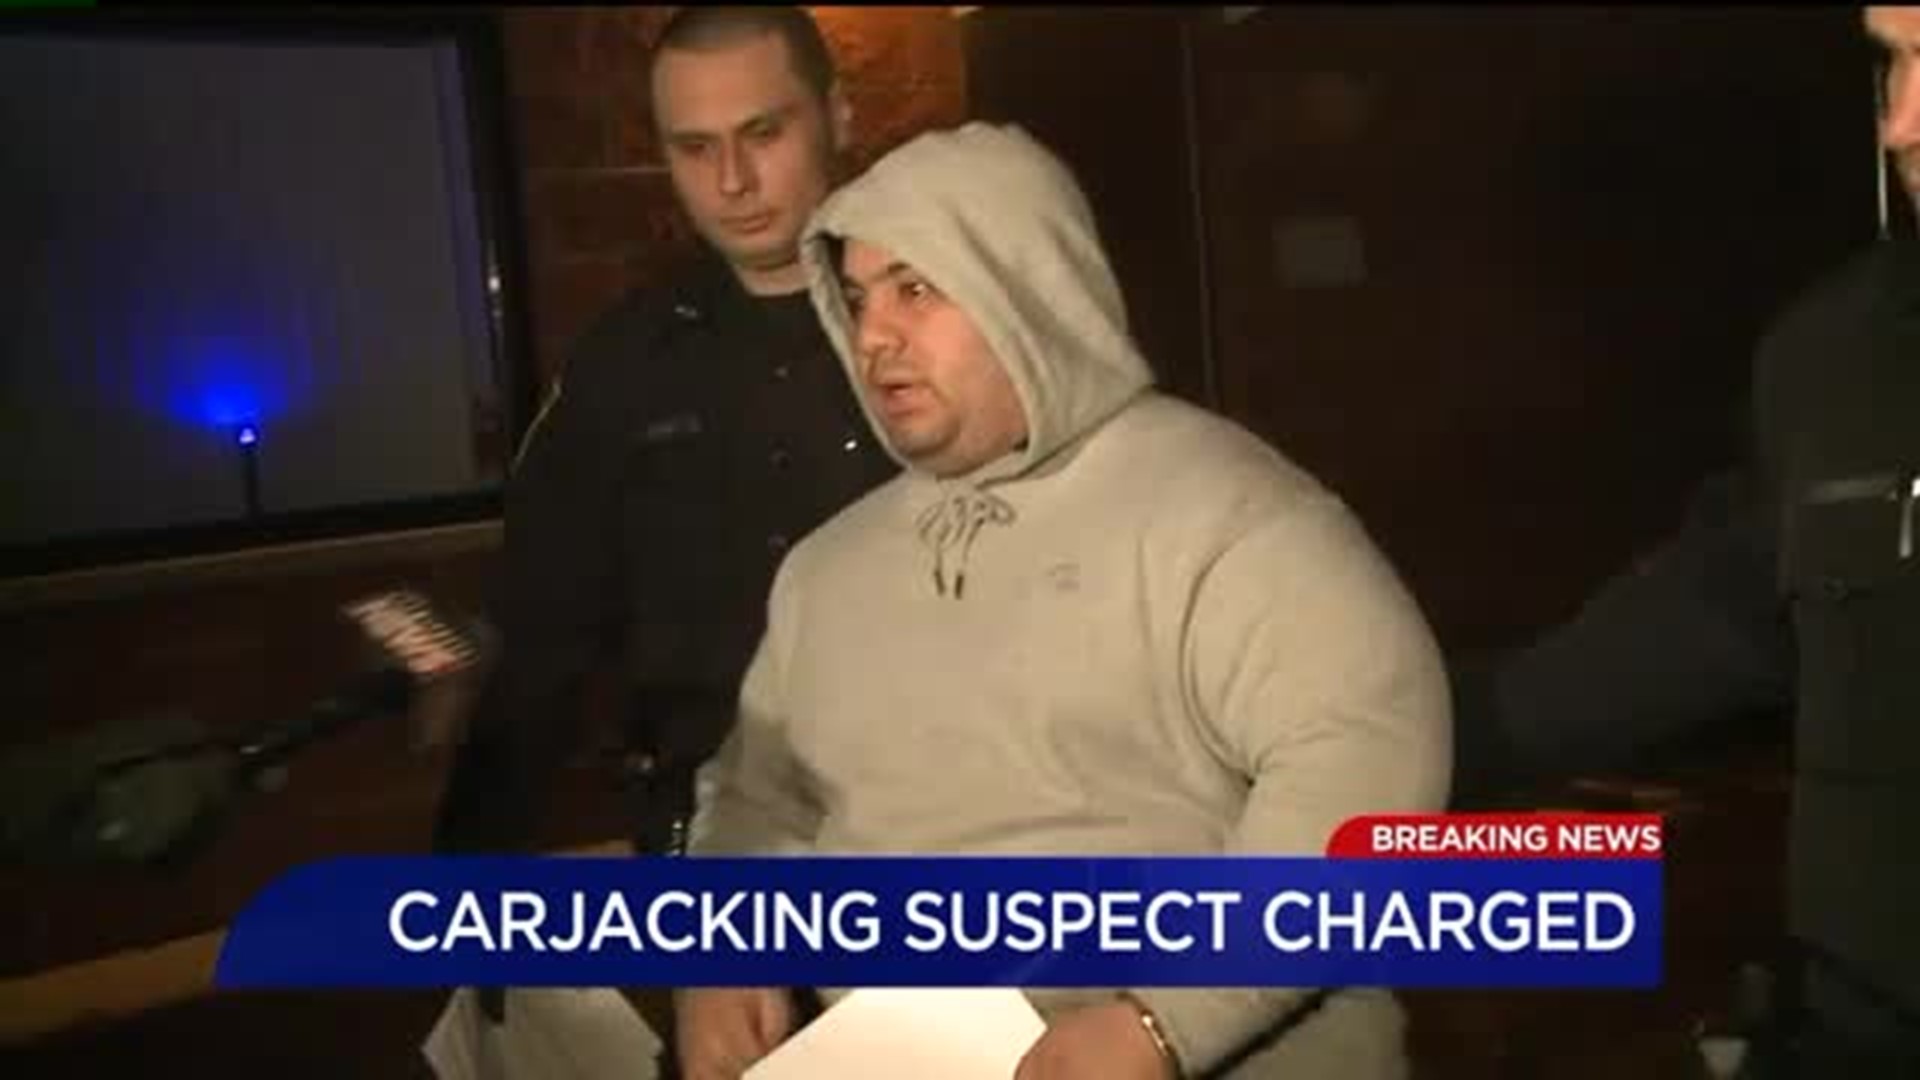 Arrest Made in Mall Carjacking Case